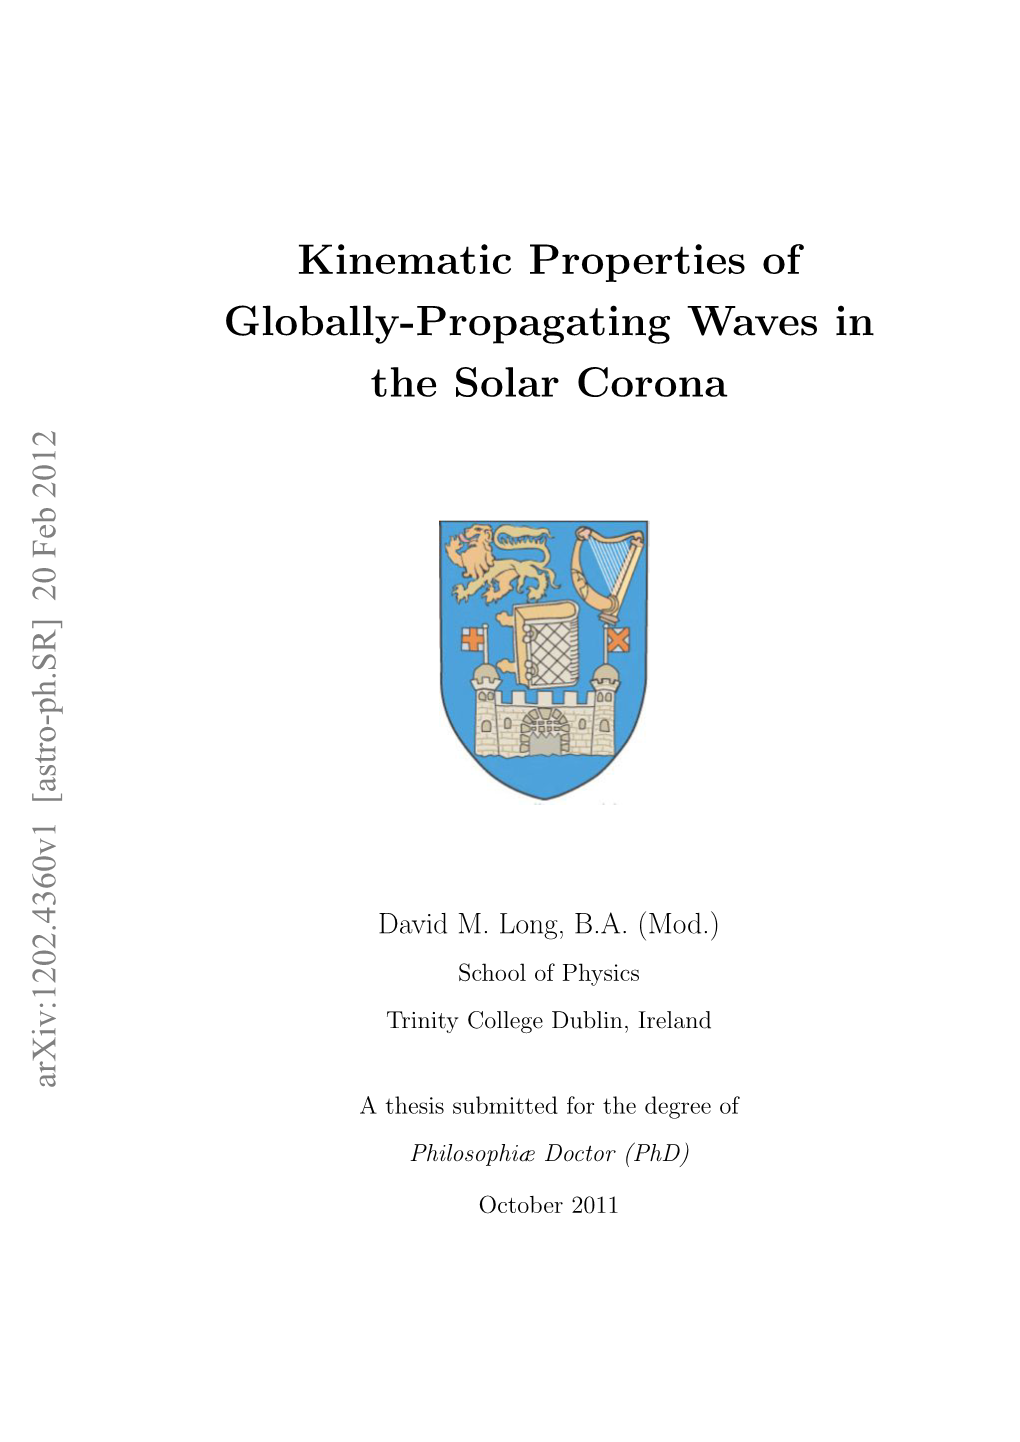 Kinematic Properties of Globally-Propagating Waves in the Solar Corona